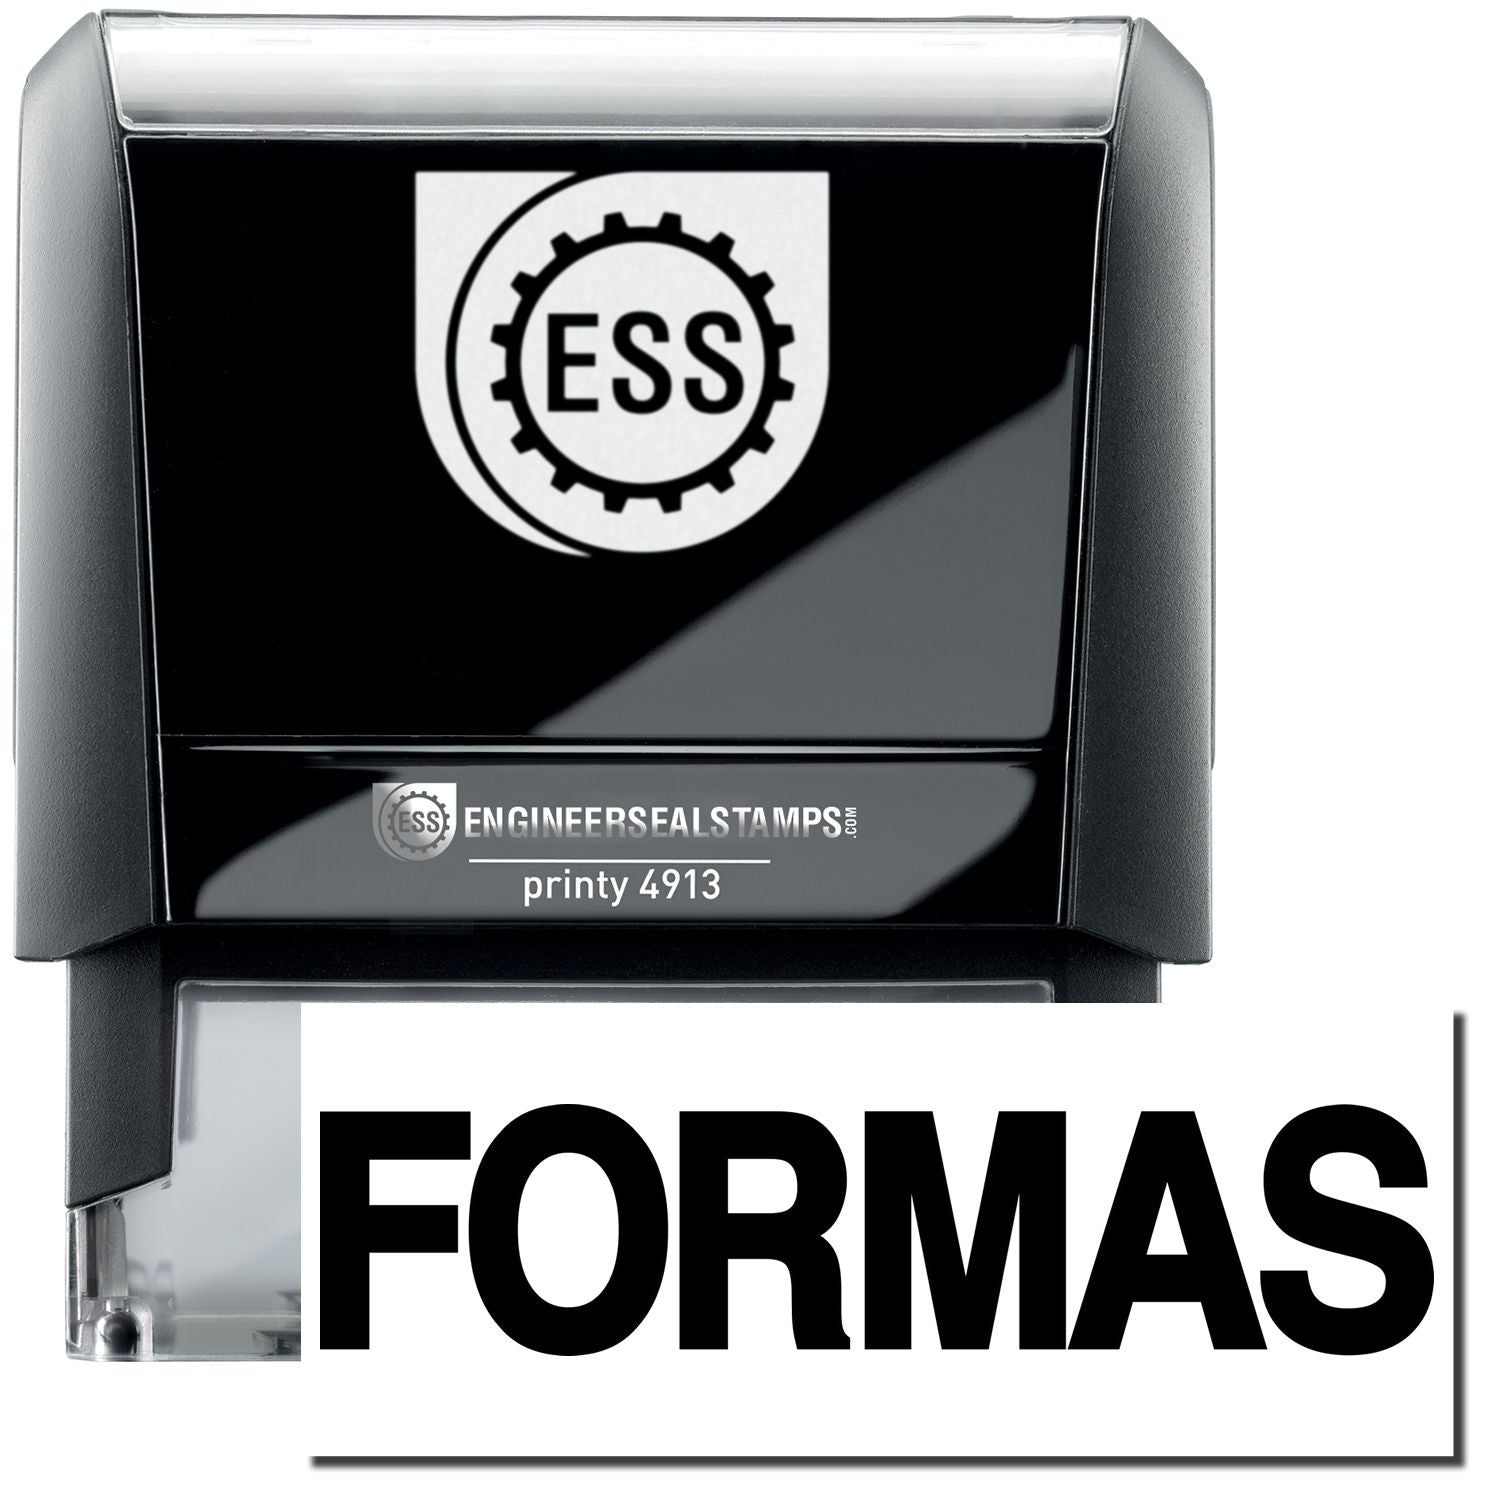 A self-inking stamp with a stamped image showing how the text "FORMAS" in a large font is displayed by it after stamping.